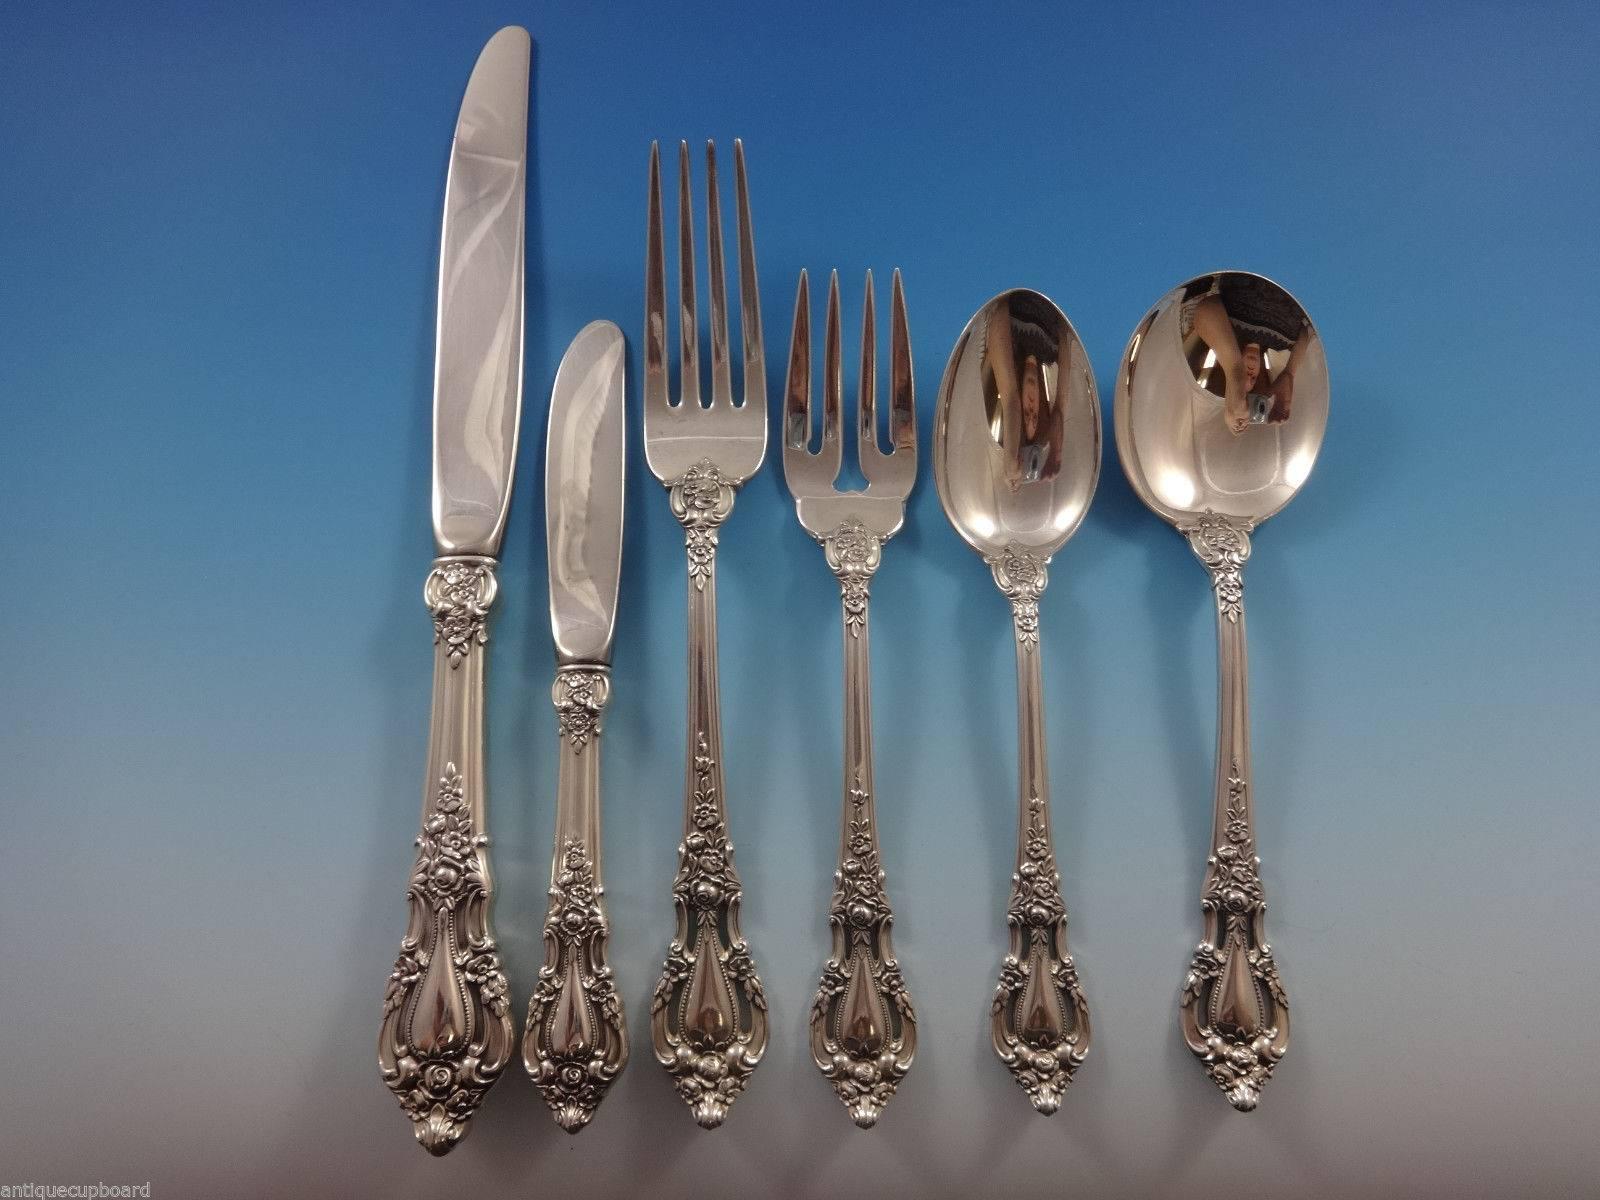 Aptly named, the Lunt Eloquence silverware collection speaks volumes of taste and tradition. First introduced in 1952, the pattern features ornate handle detailing, delicate cutouts, and coordinating flourishes at the neck. The working ends are